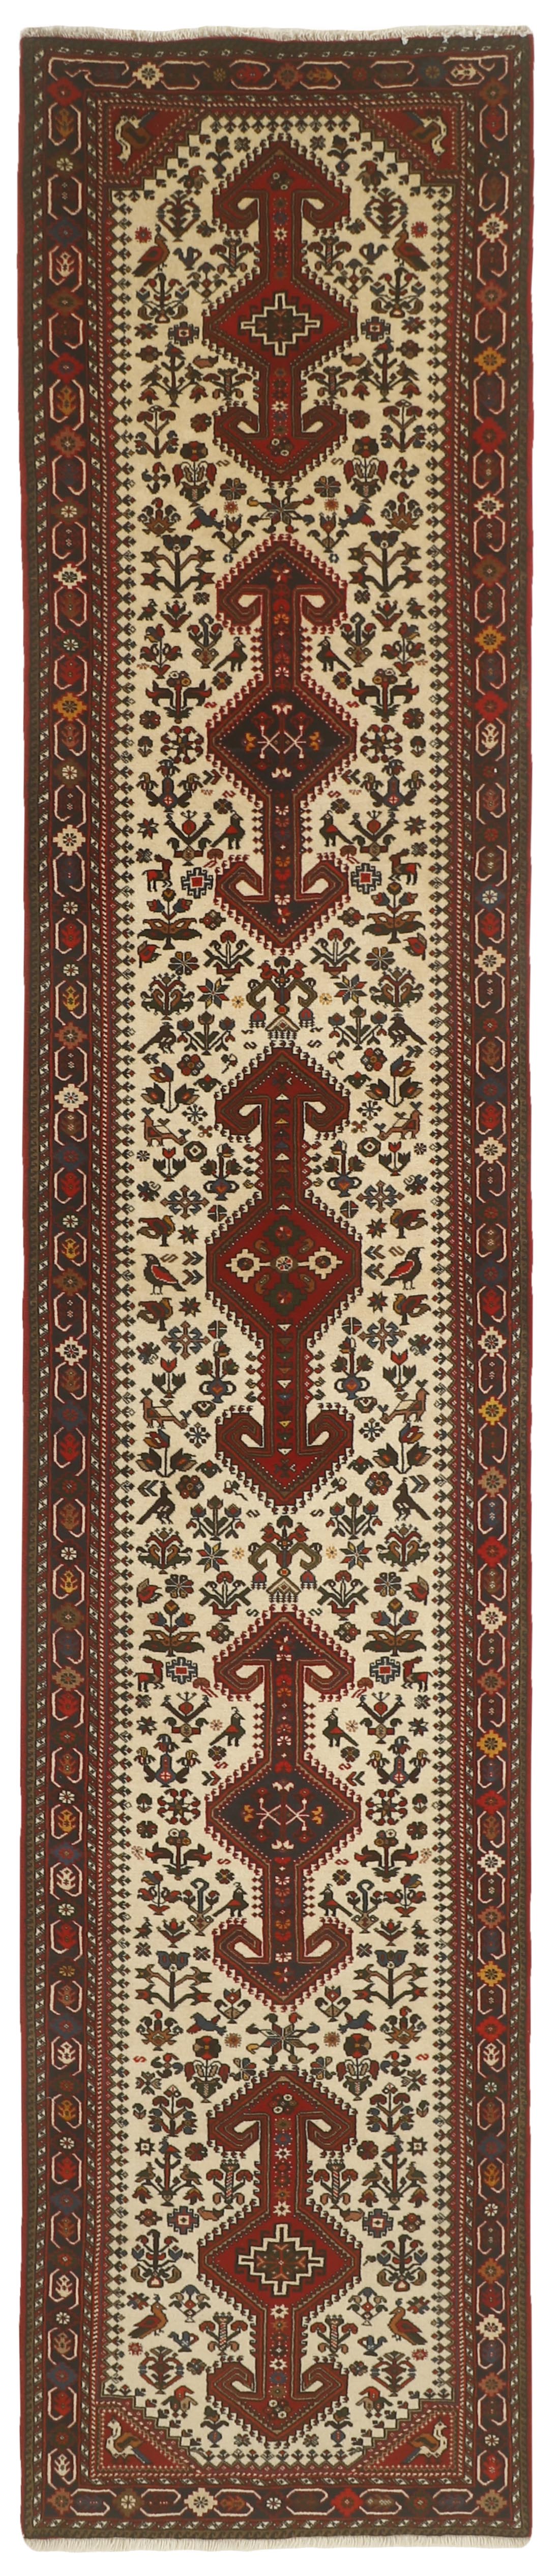 Authentic persian runner with traditional tribal geometric design in red